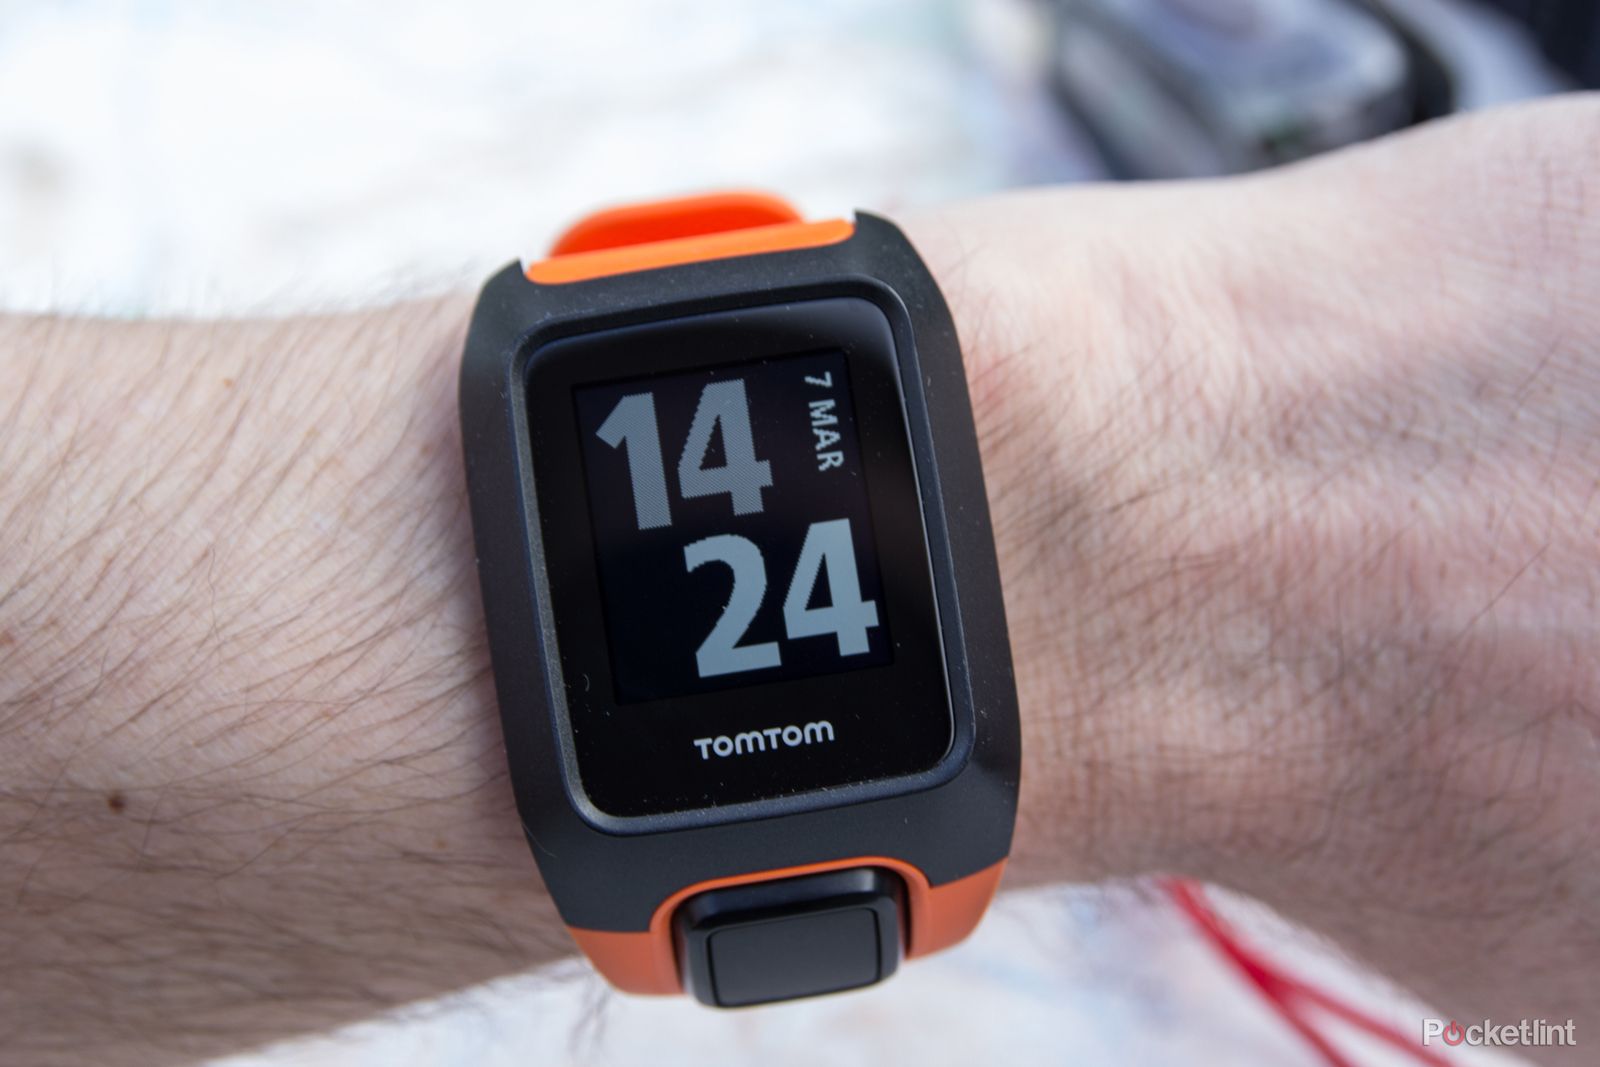 tomtom quitting wearables  image 1